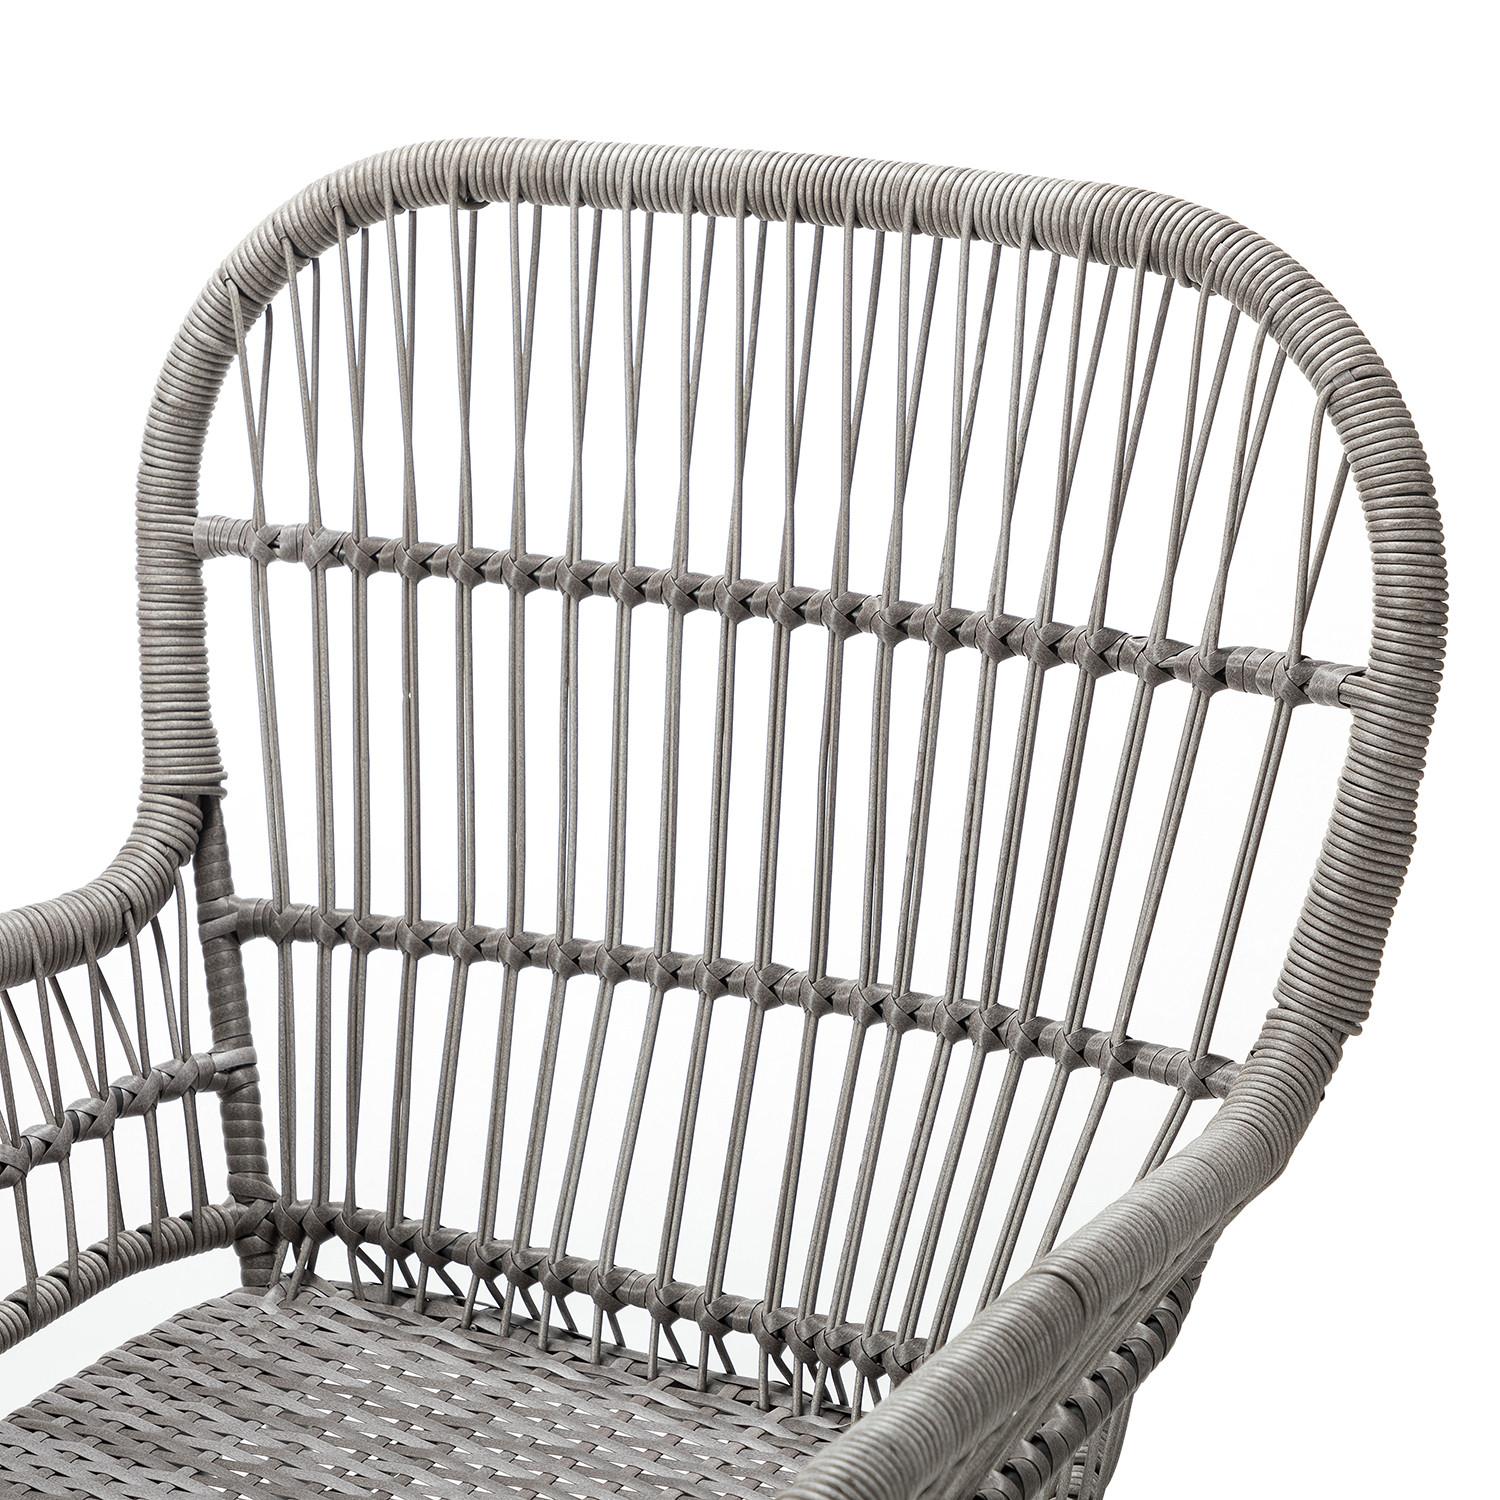 Gray Faux Rattan and Slate Blue Outdoor Chair and Table Set